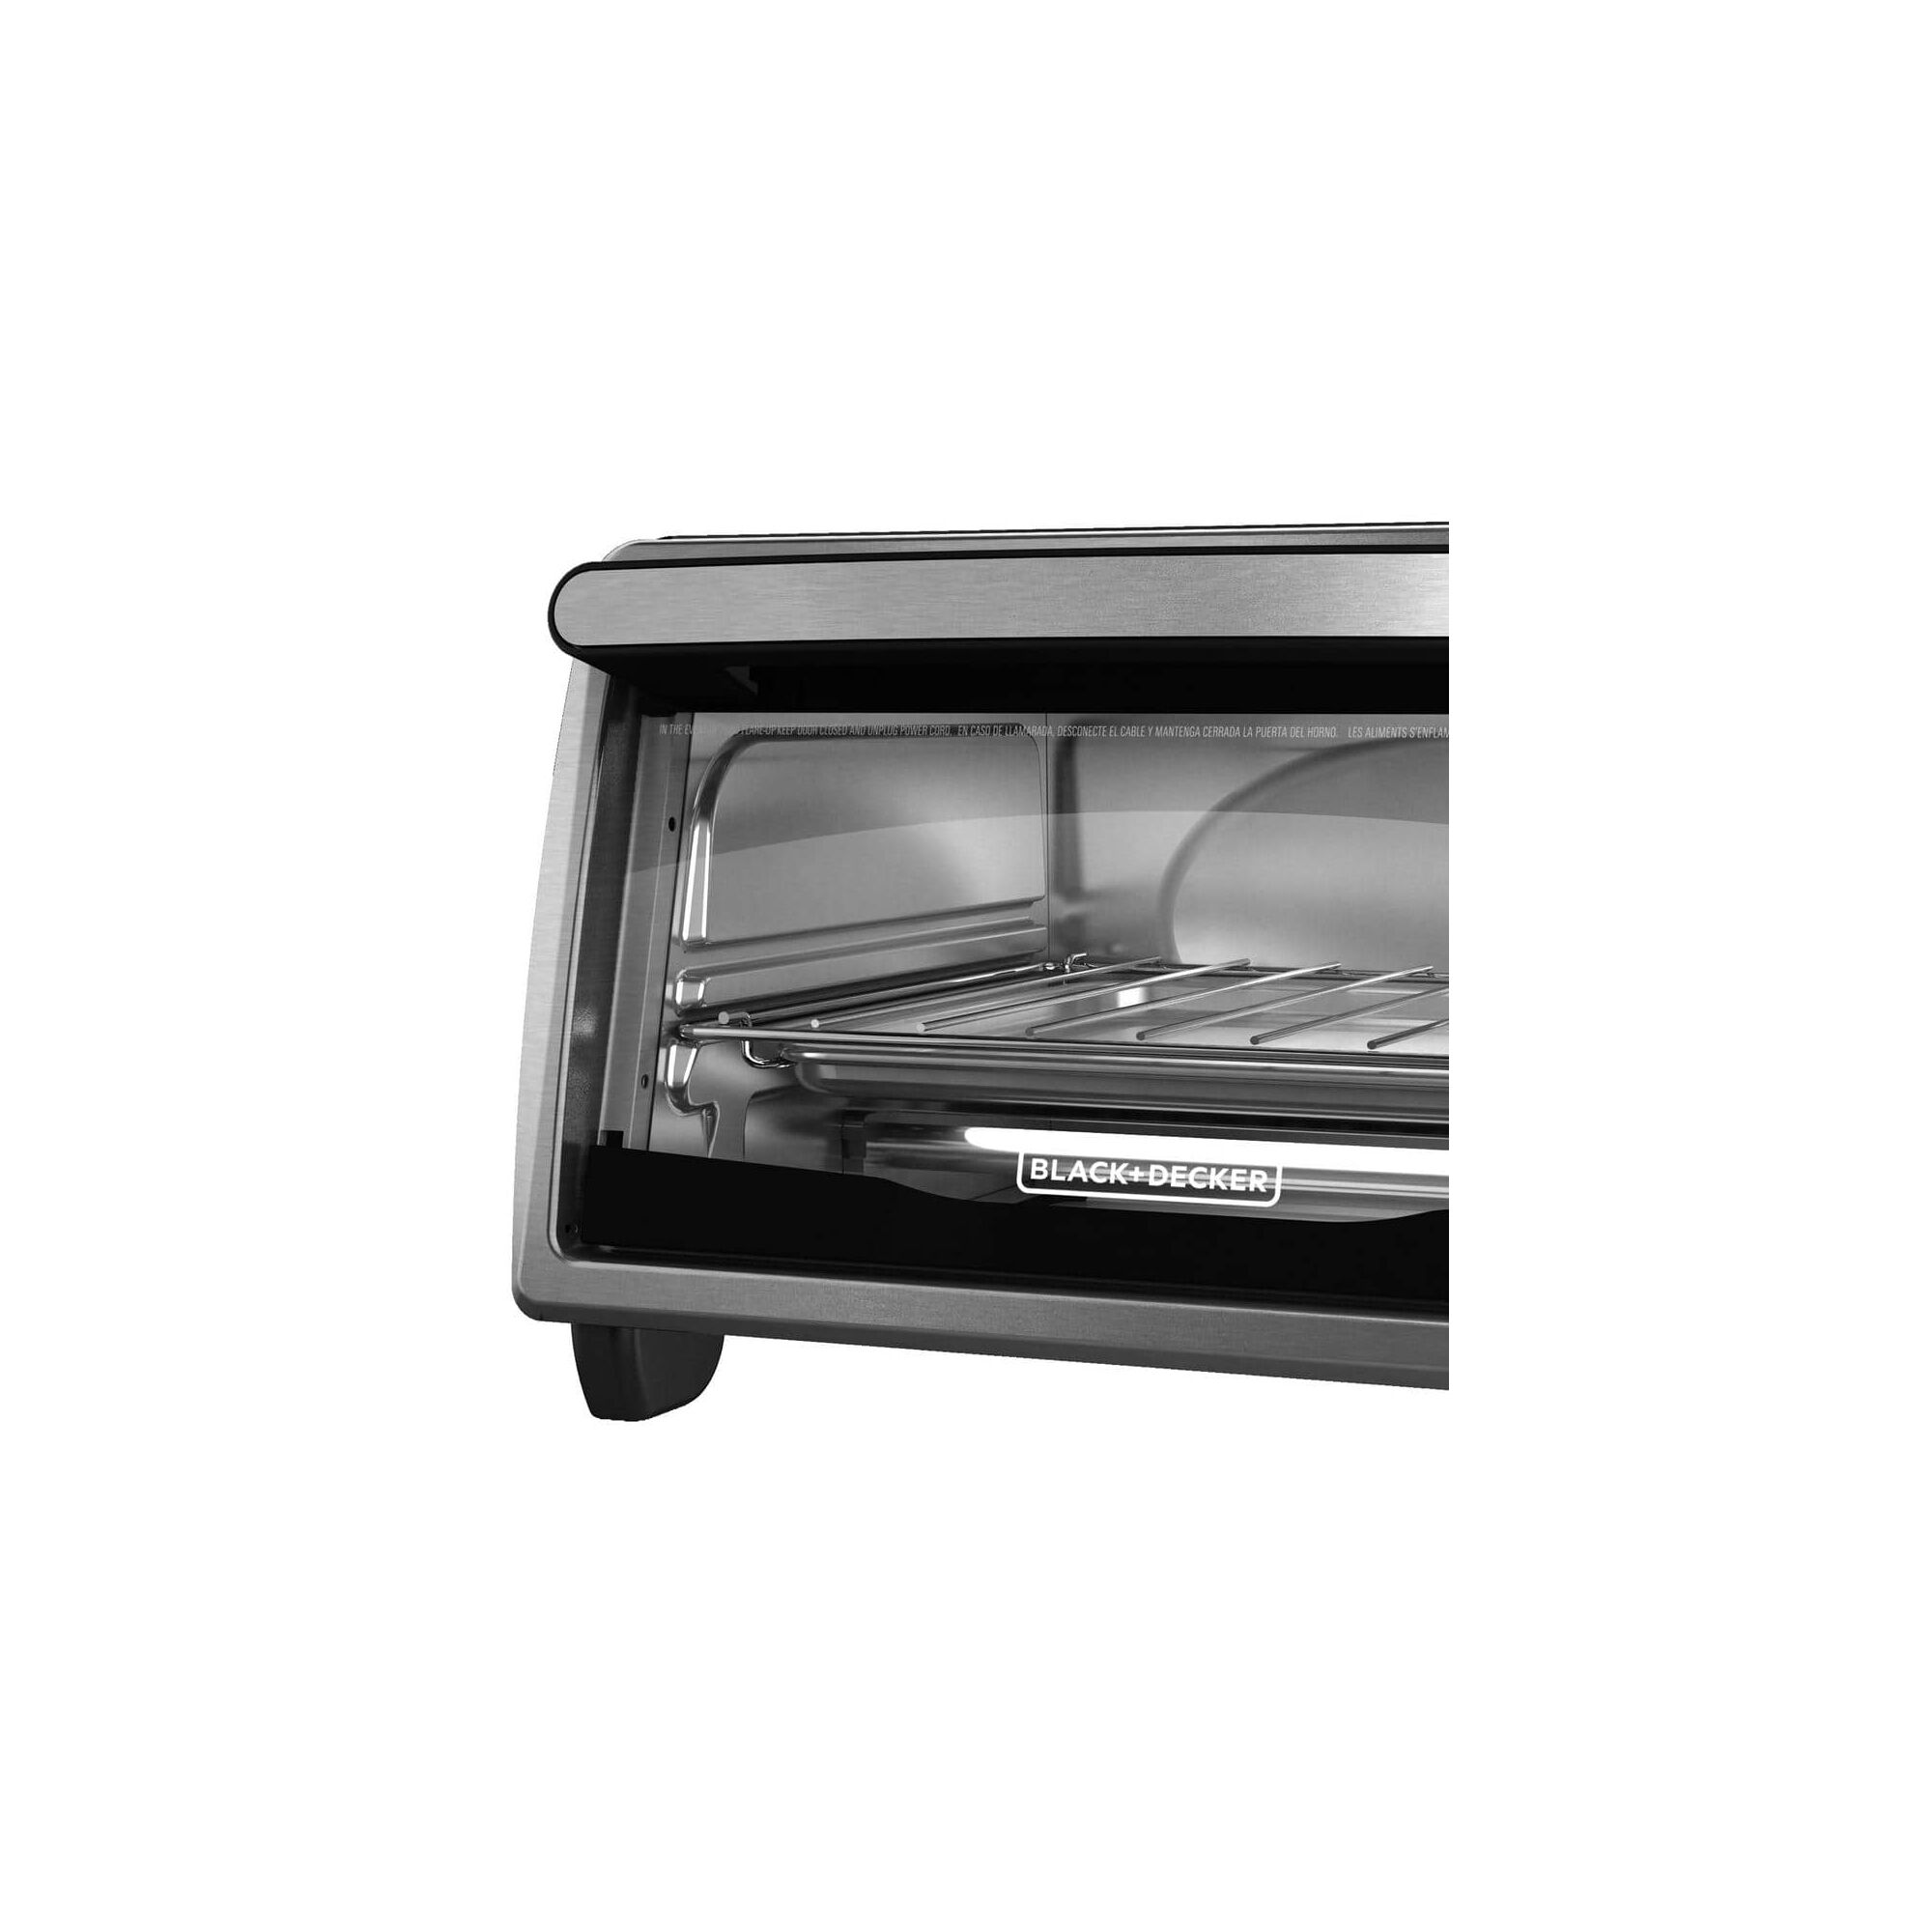 Close-up of 4-Slice Toaster Oven on white background.